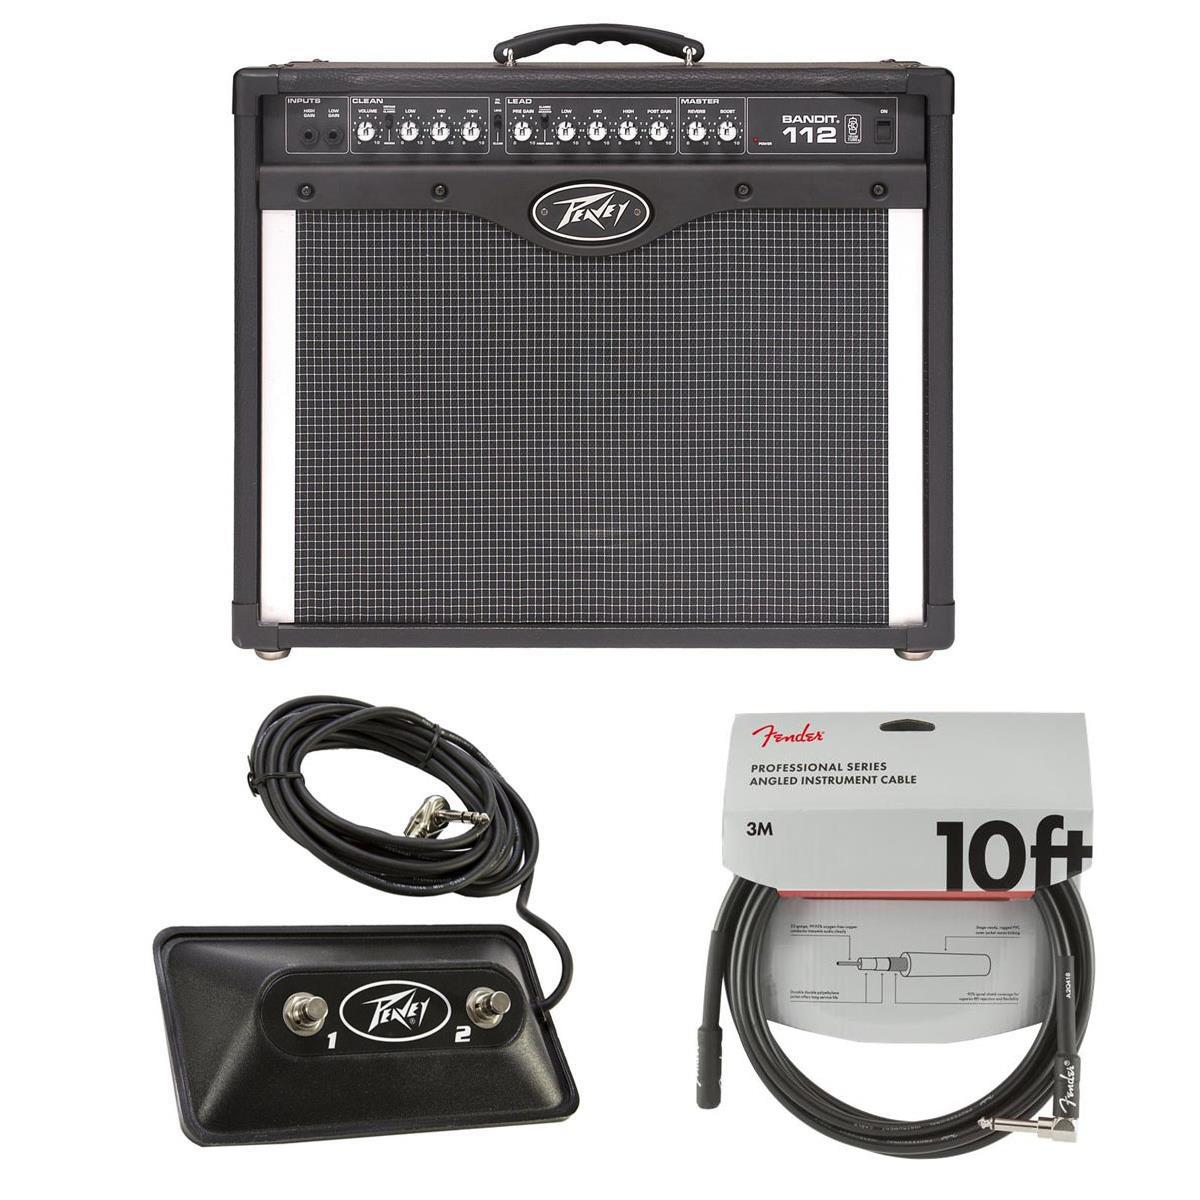 Peavey TransTube Bandit 112 120US Guitar Amplifier W/2 Button Foot Switch/Cable -  00583640 A